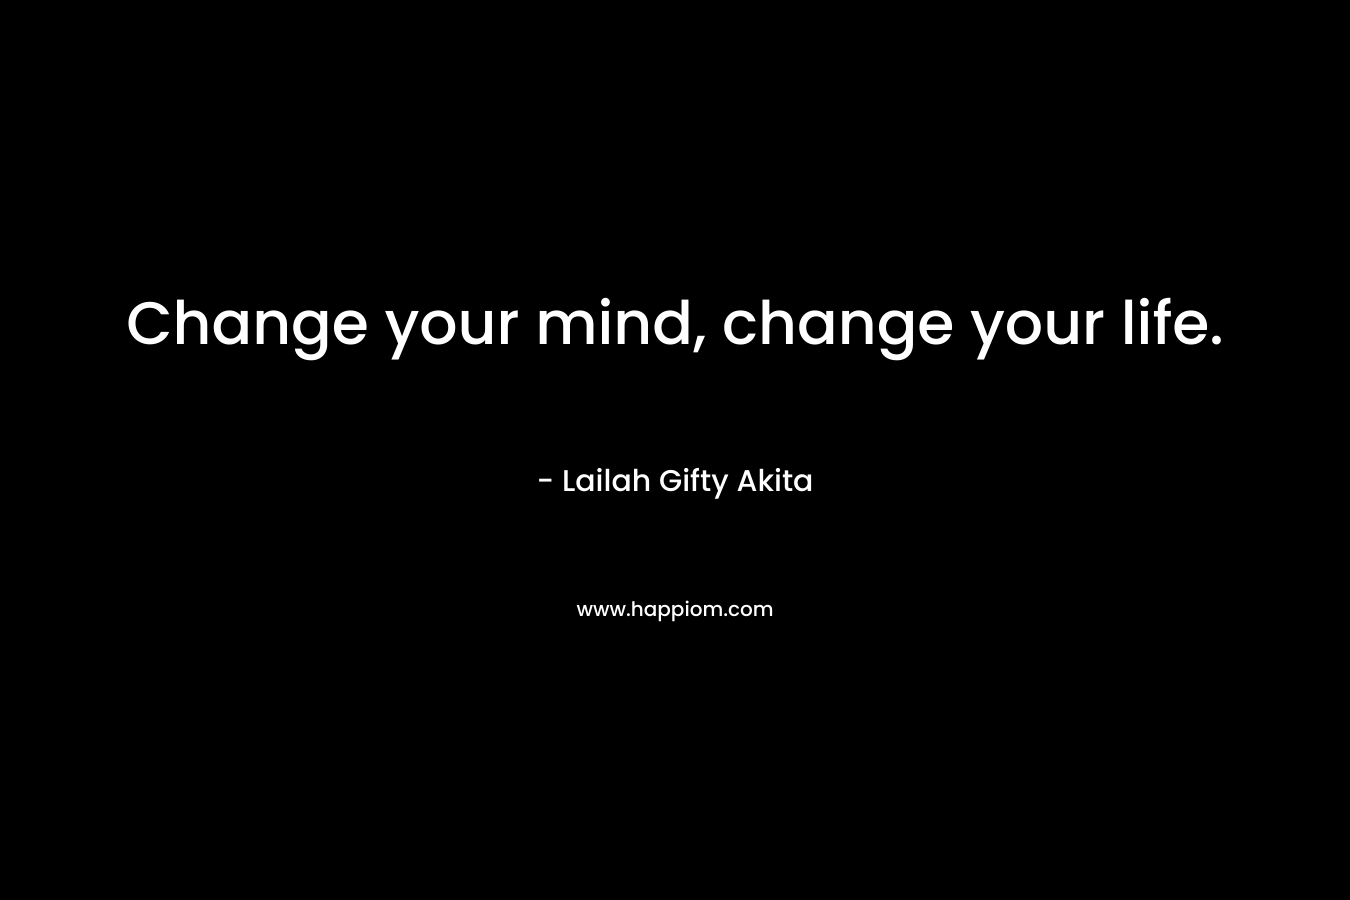 Change your mind, change your life.